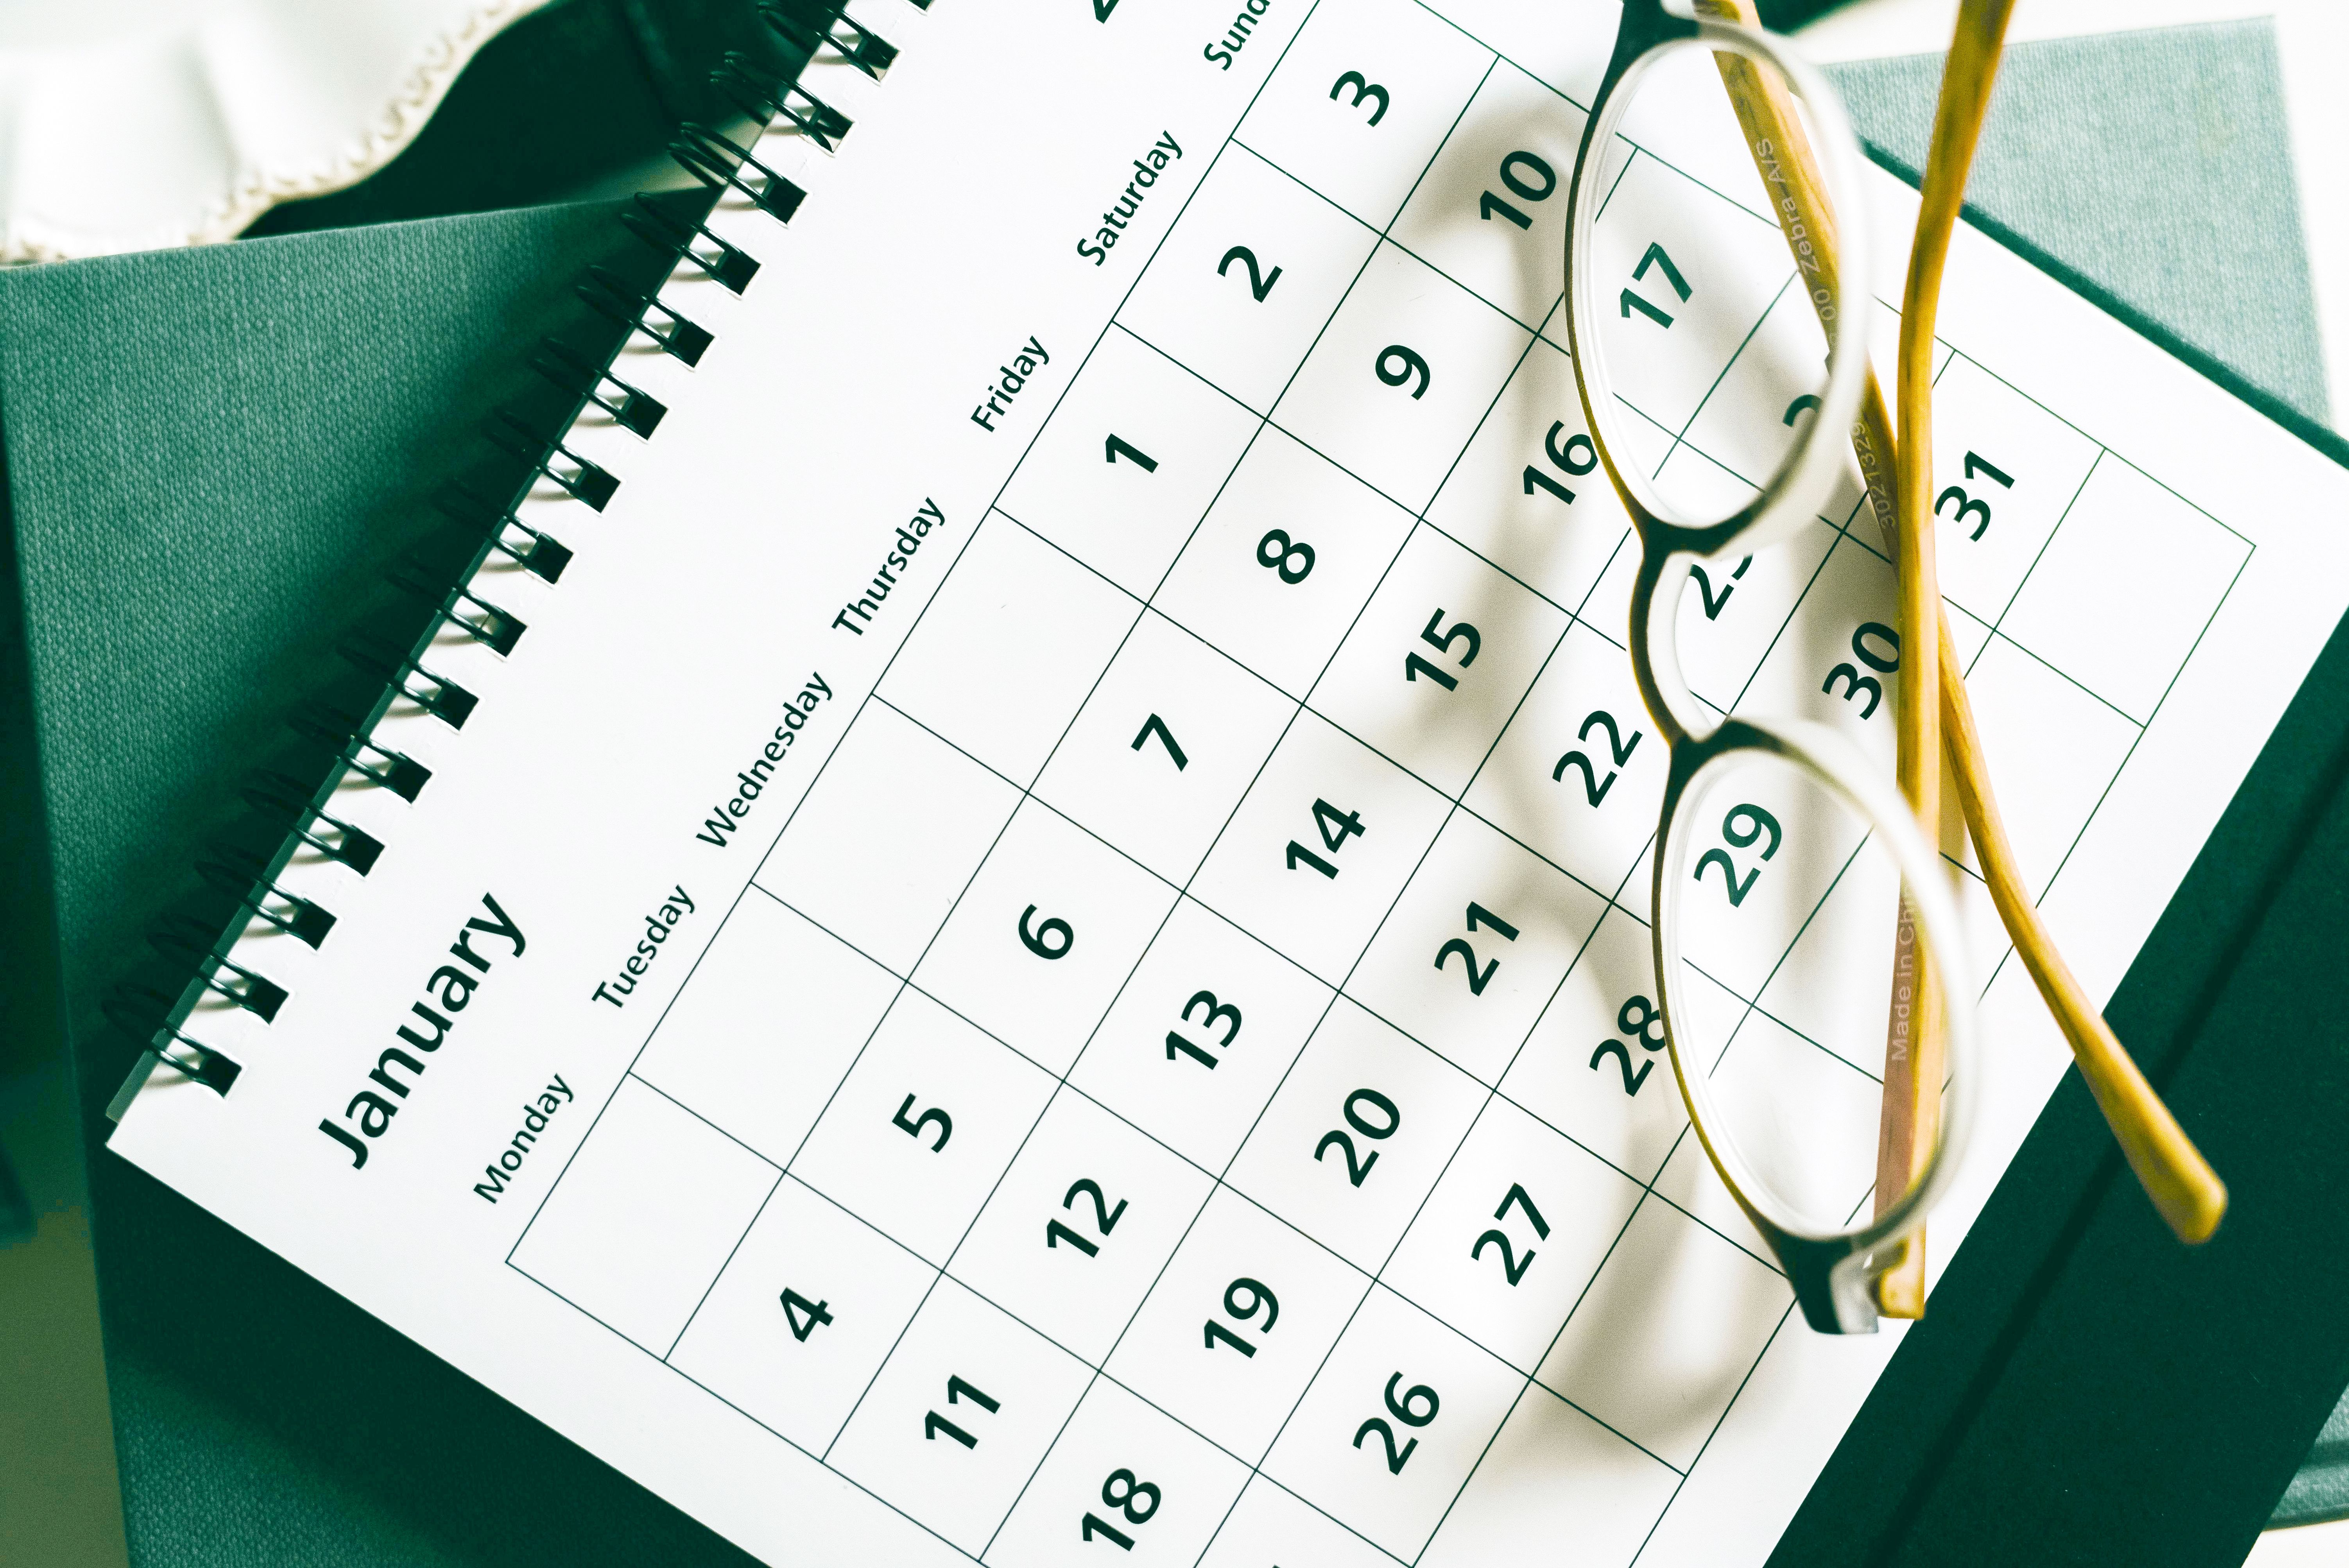 A flip calendar that shows the month of January, with a pair of reading glasses sitting on top